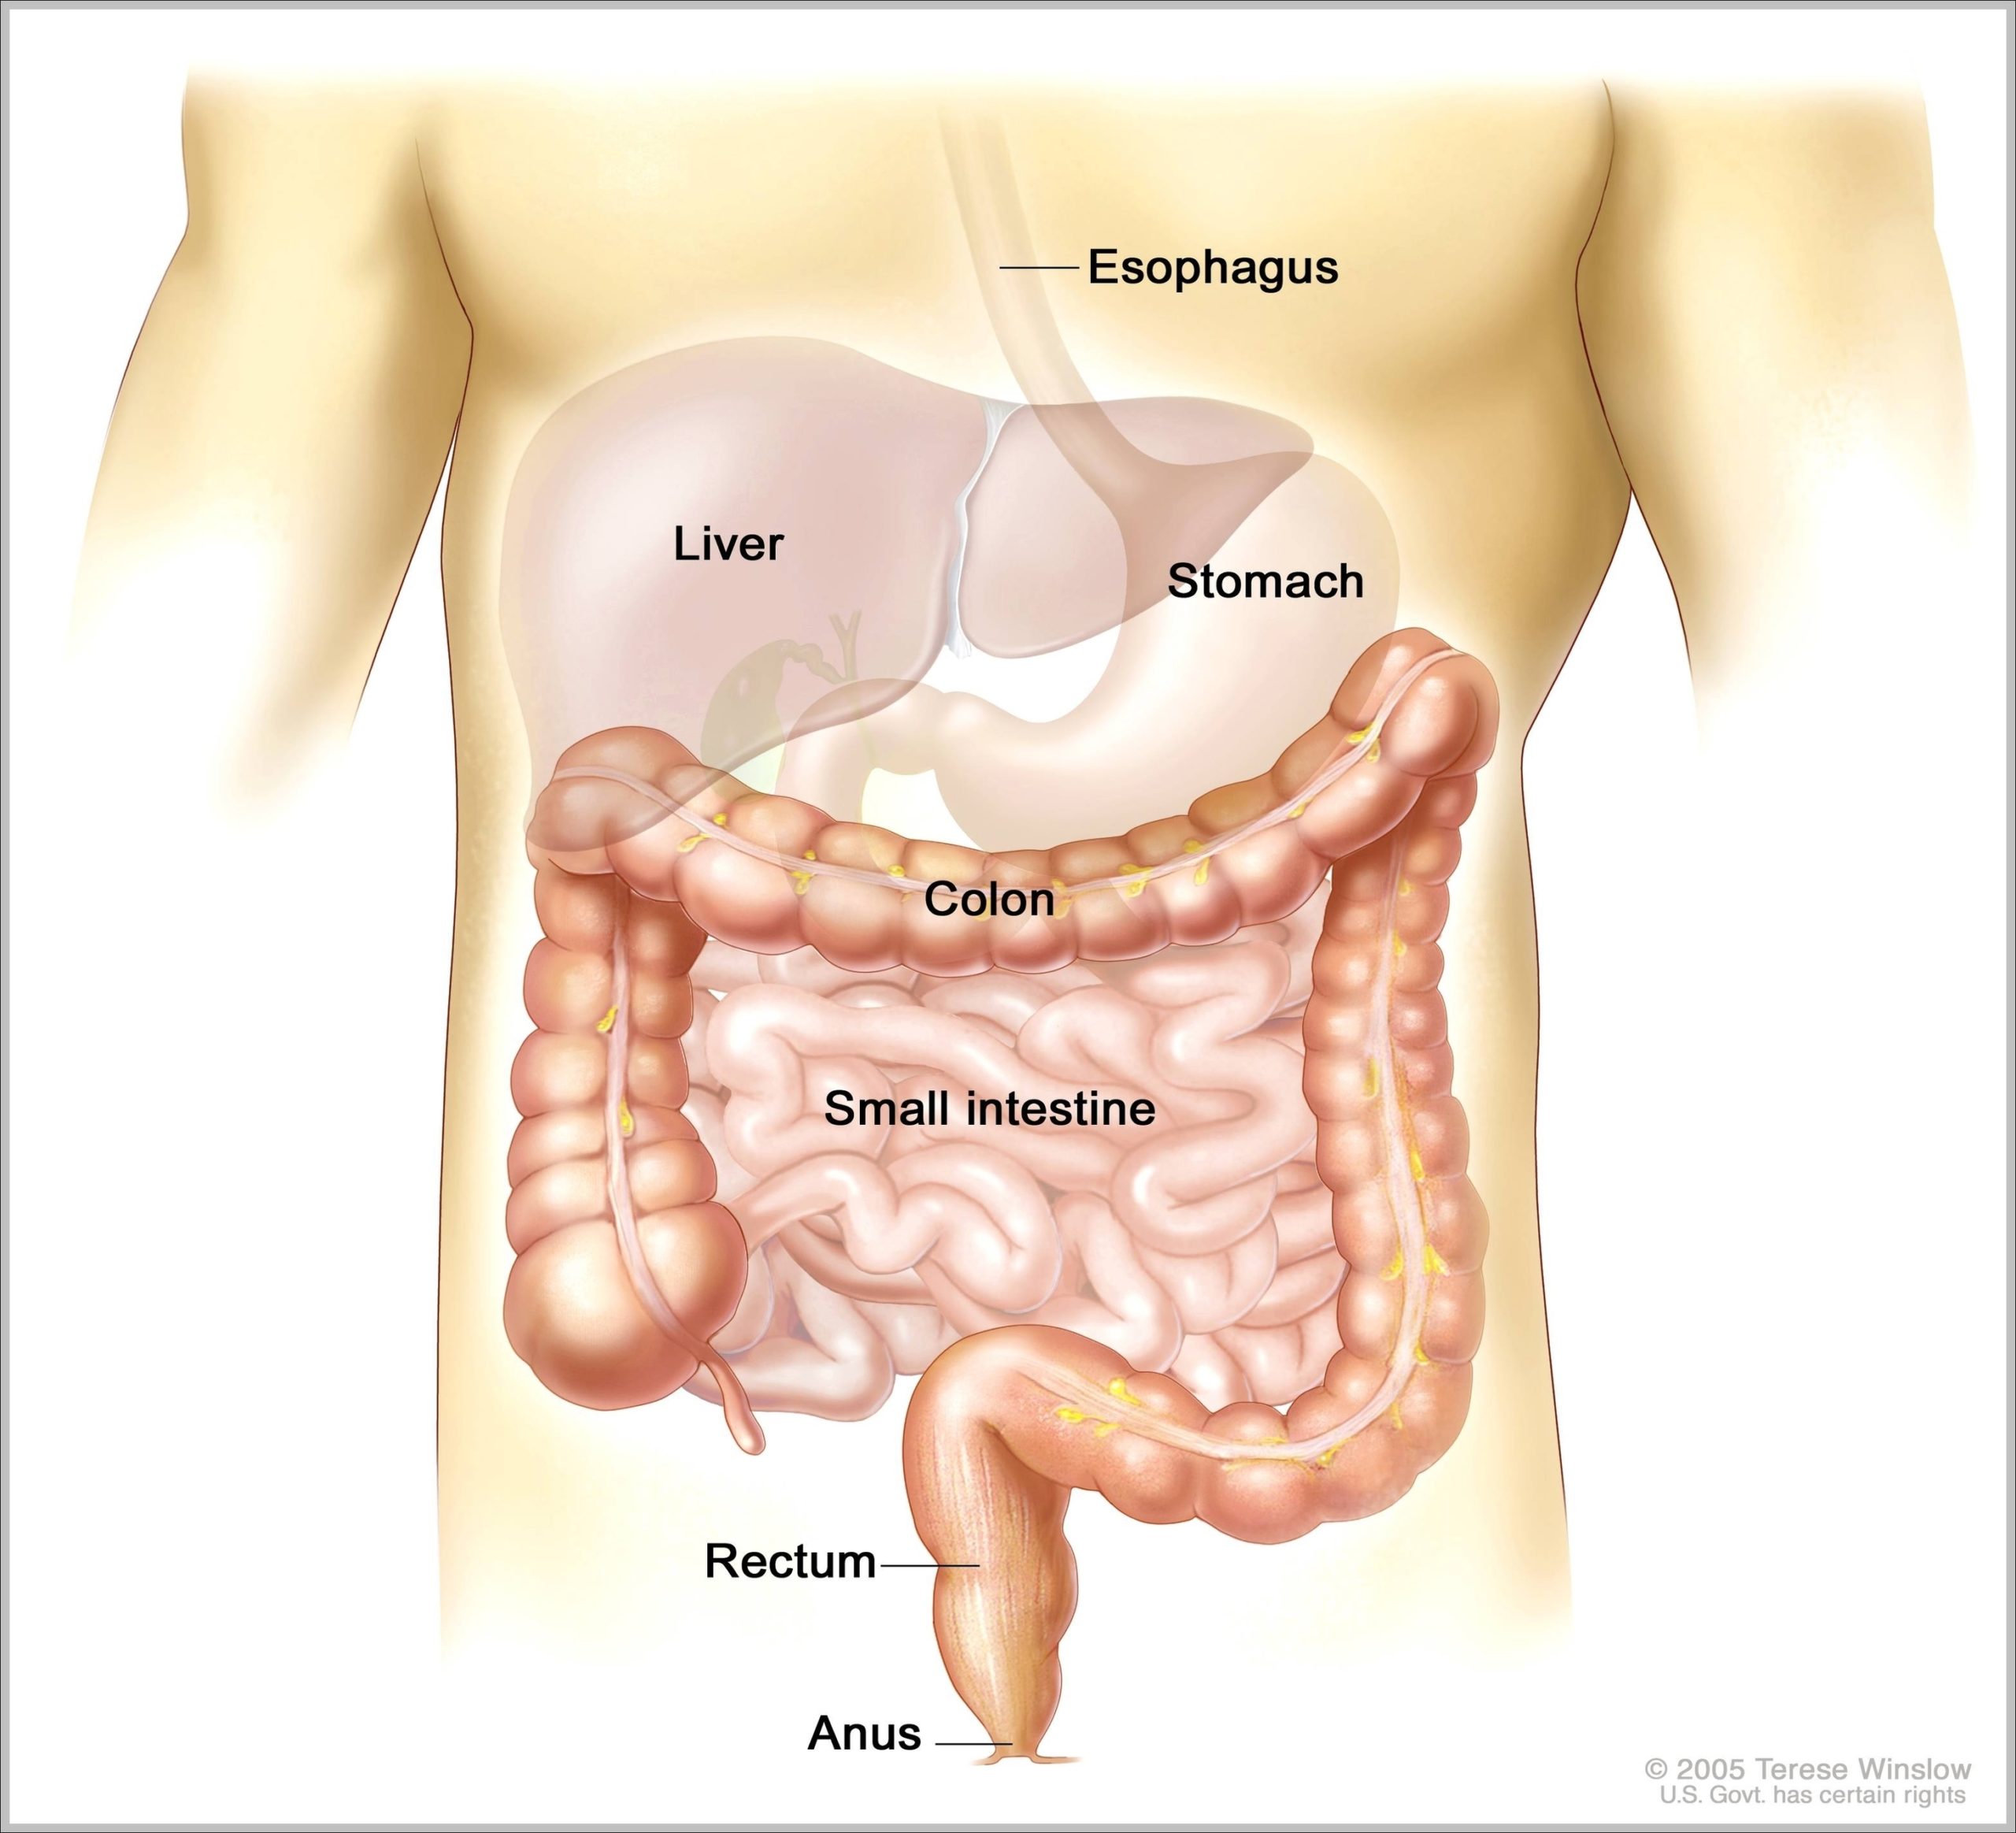 Picture Of Intestines Image scaled